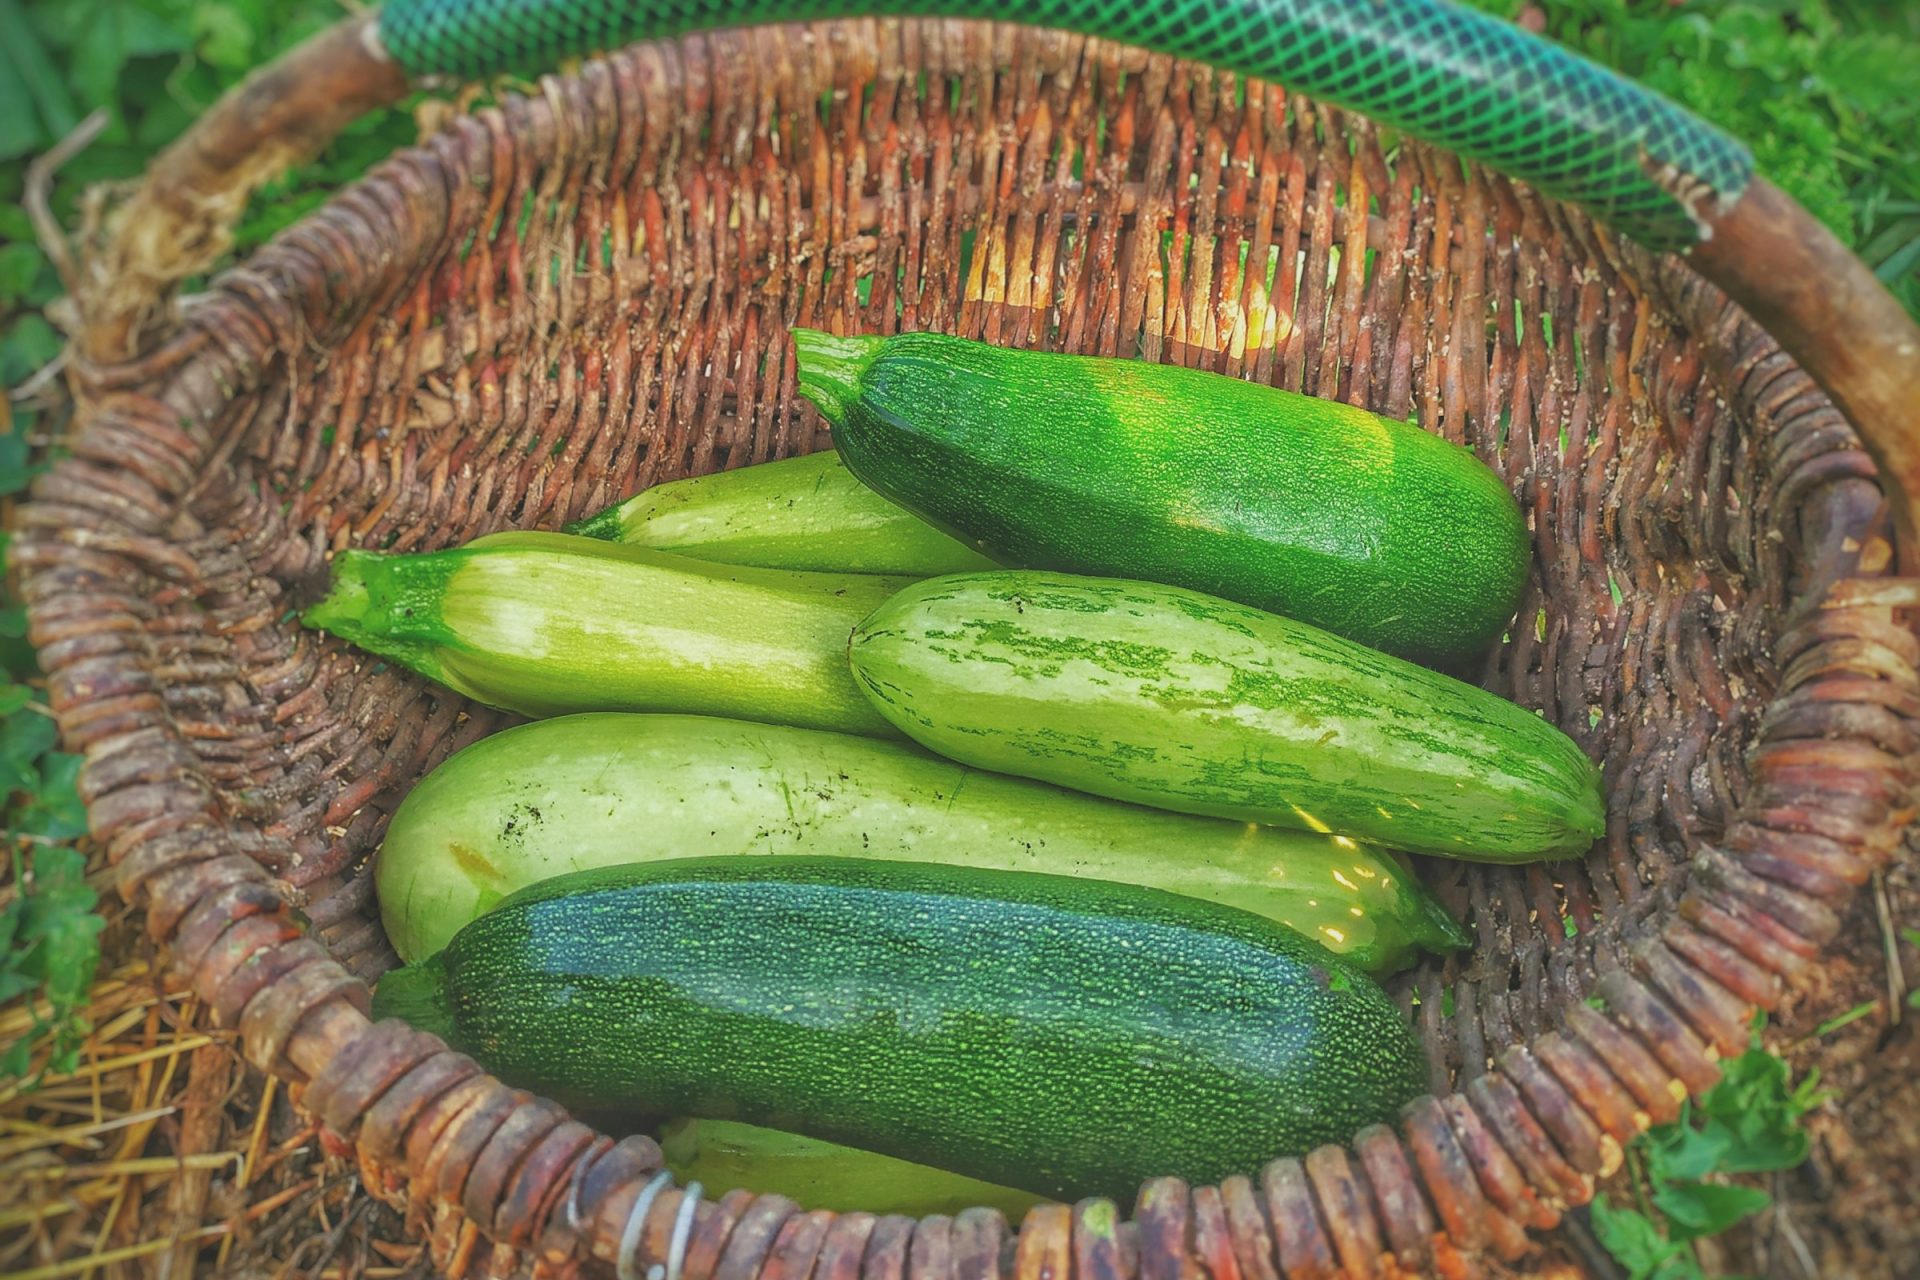 Summer squash (zucchini and similar): bagged, but let them breathe